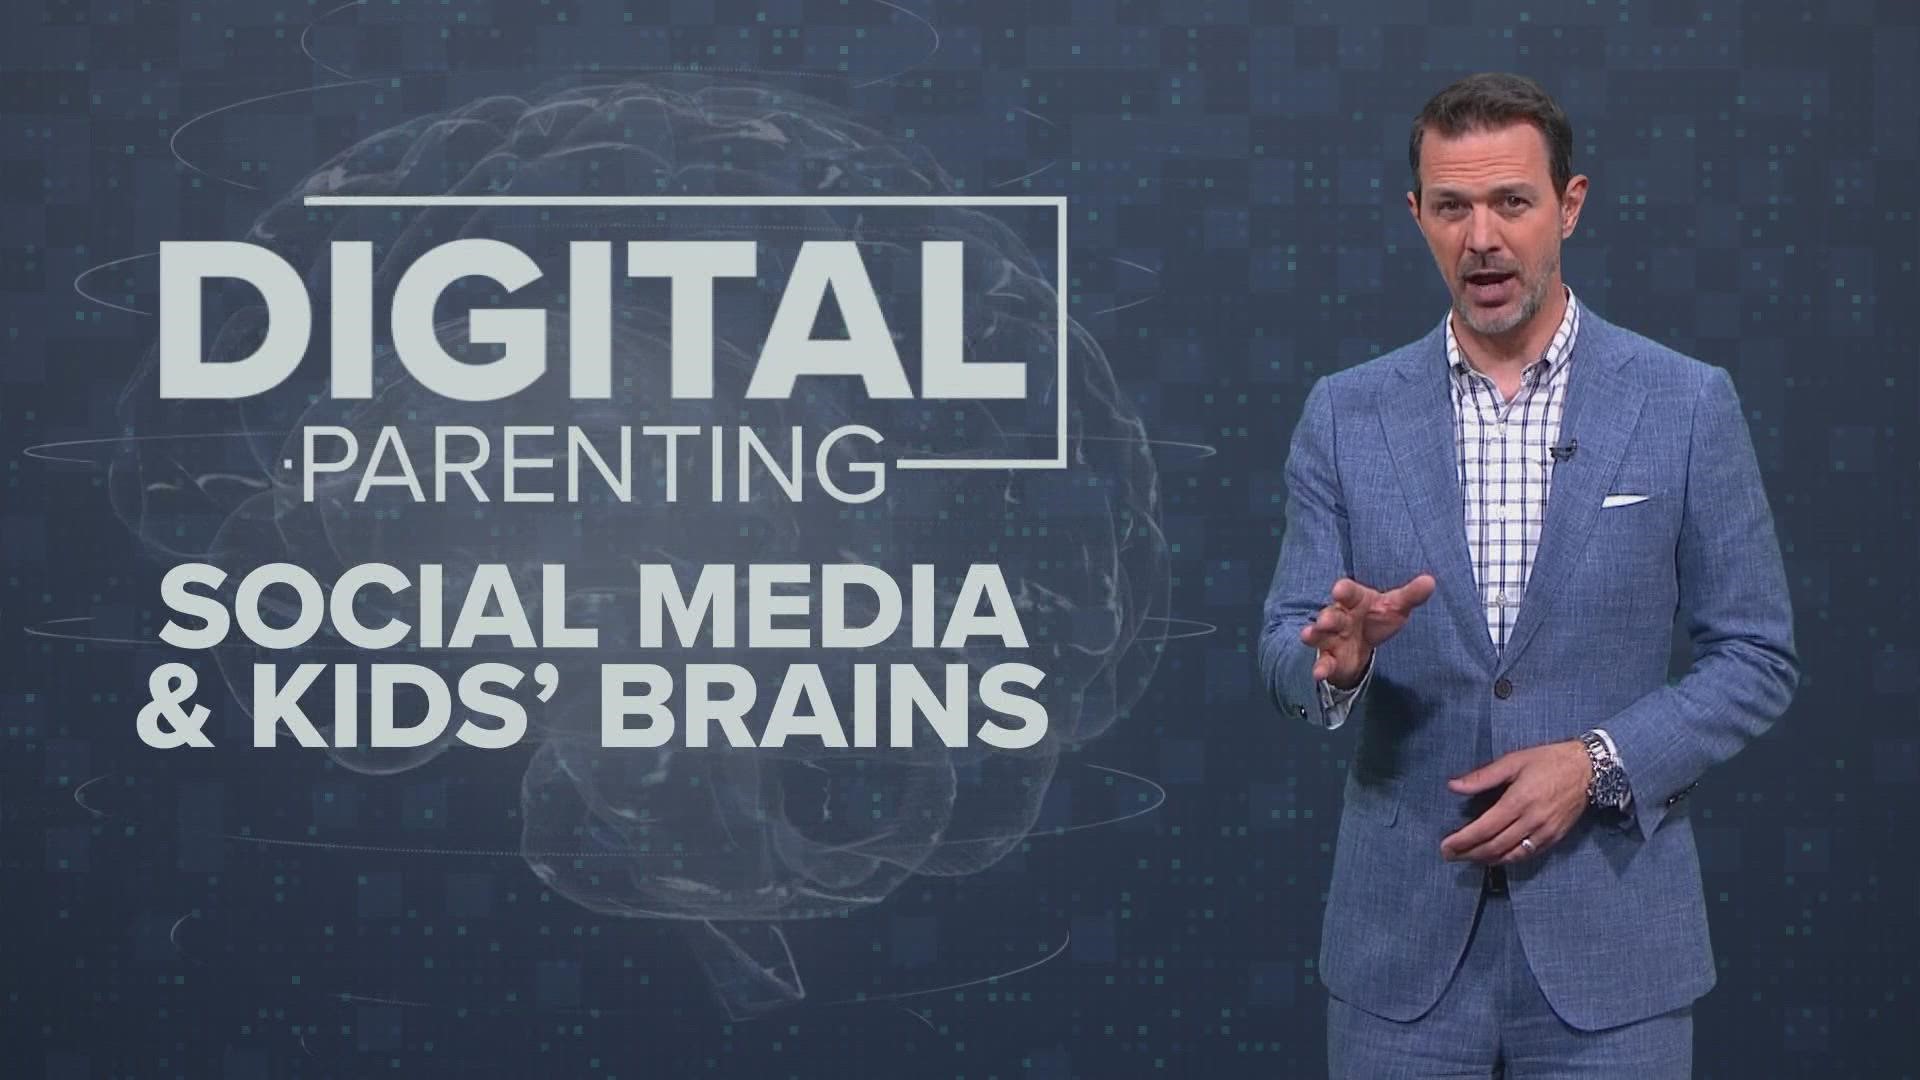 Marc Istook talked with an expert about how social media can impact your children.